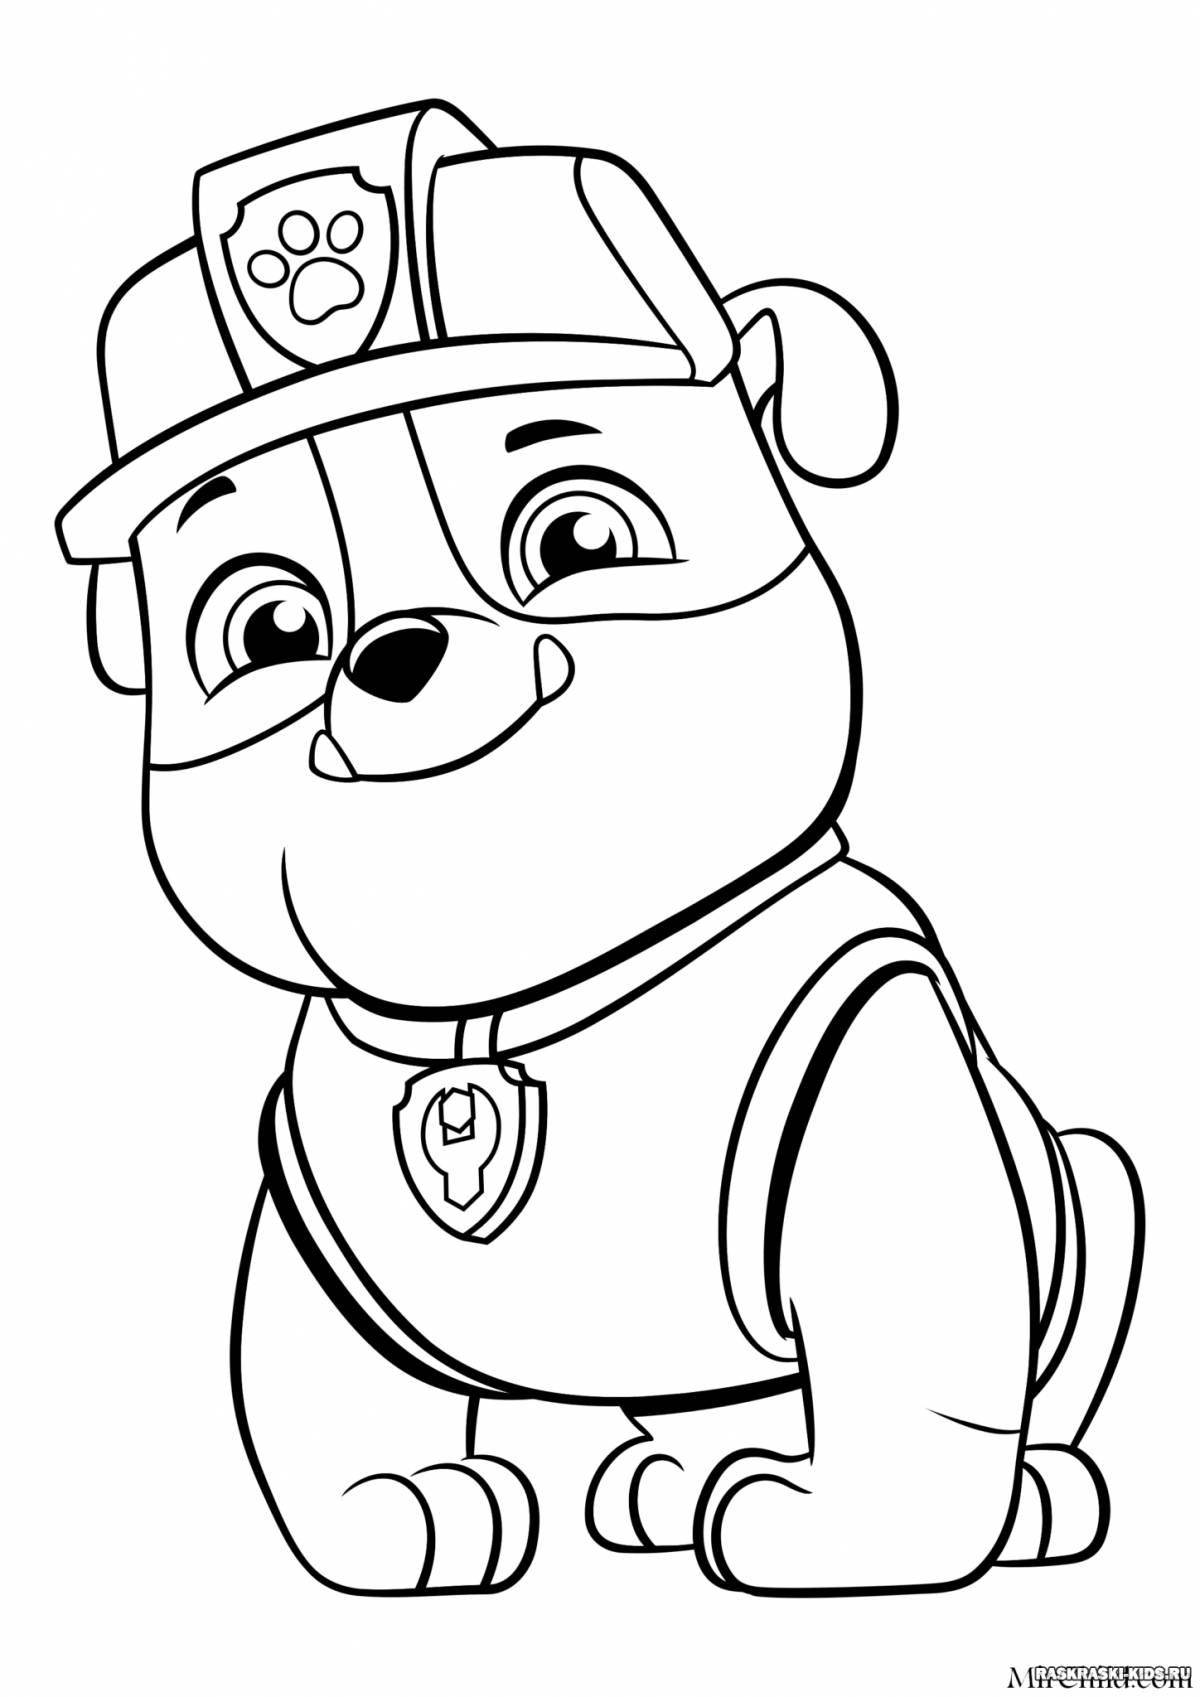 Cute paw patrol baby coloring page